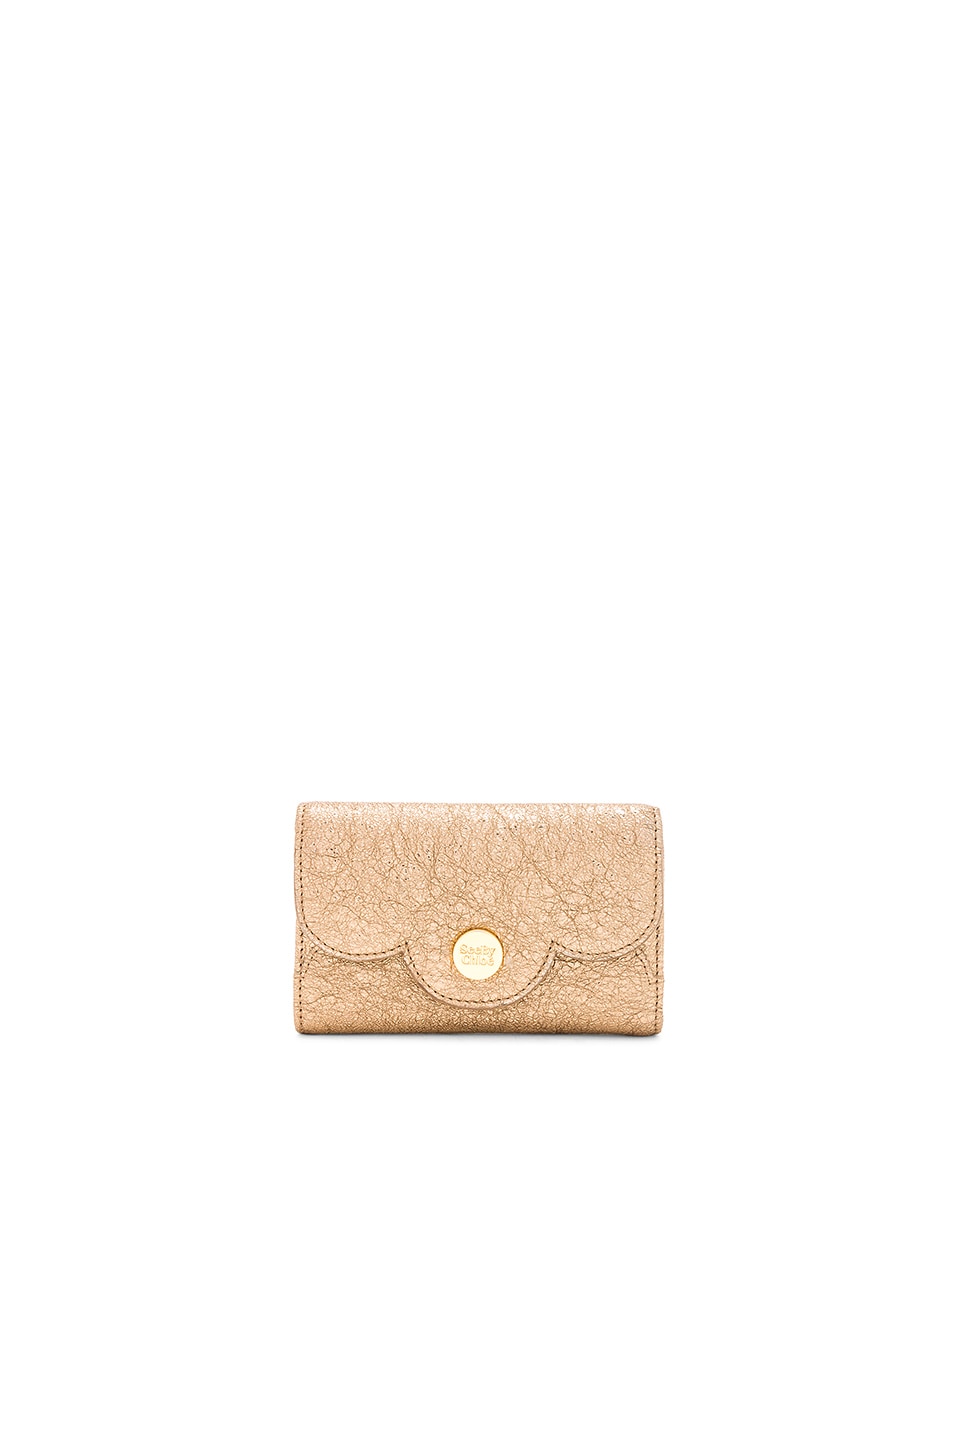 SEE BY CHLOÉ POLINA SMALL WALLET